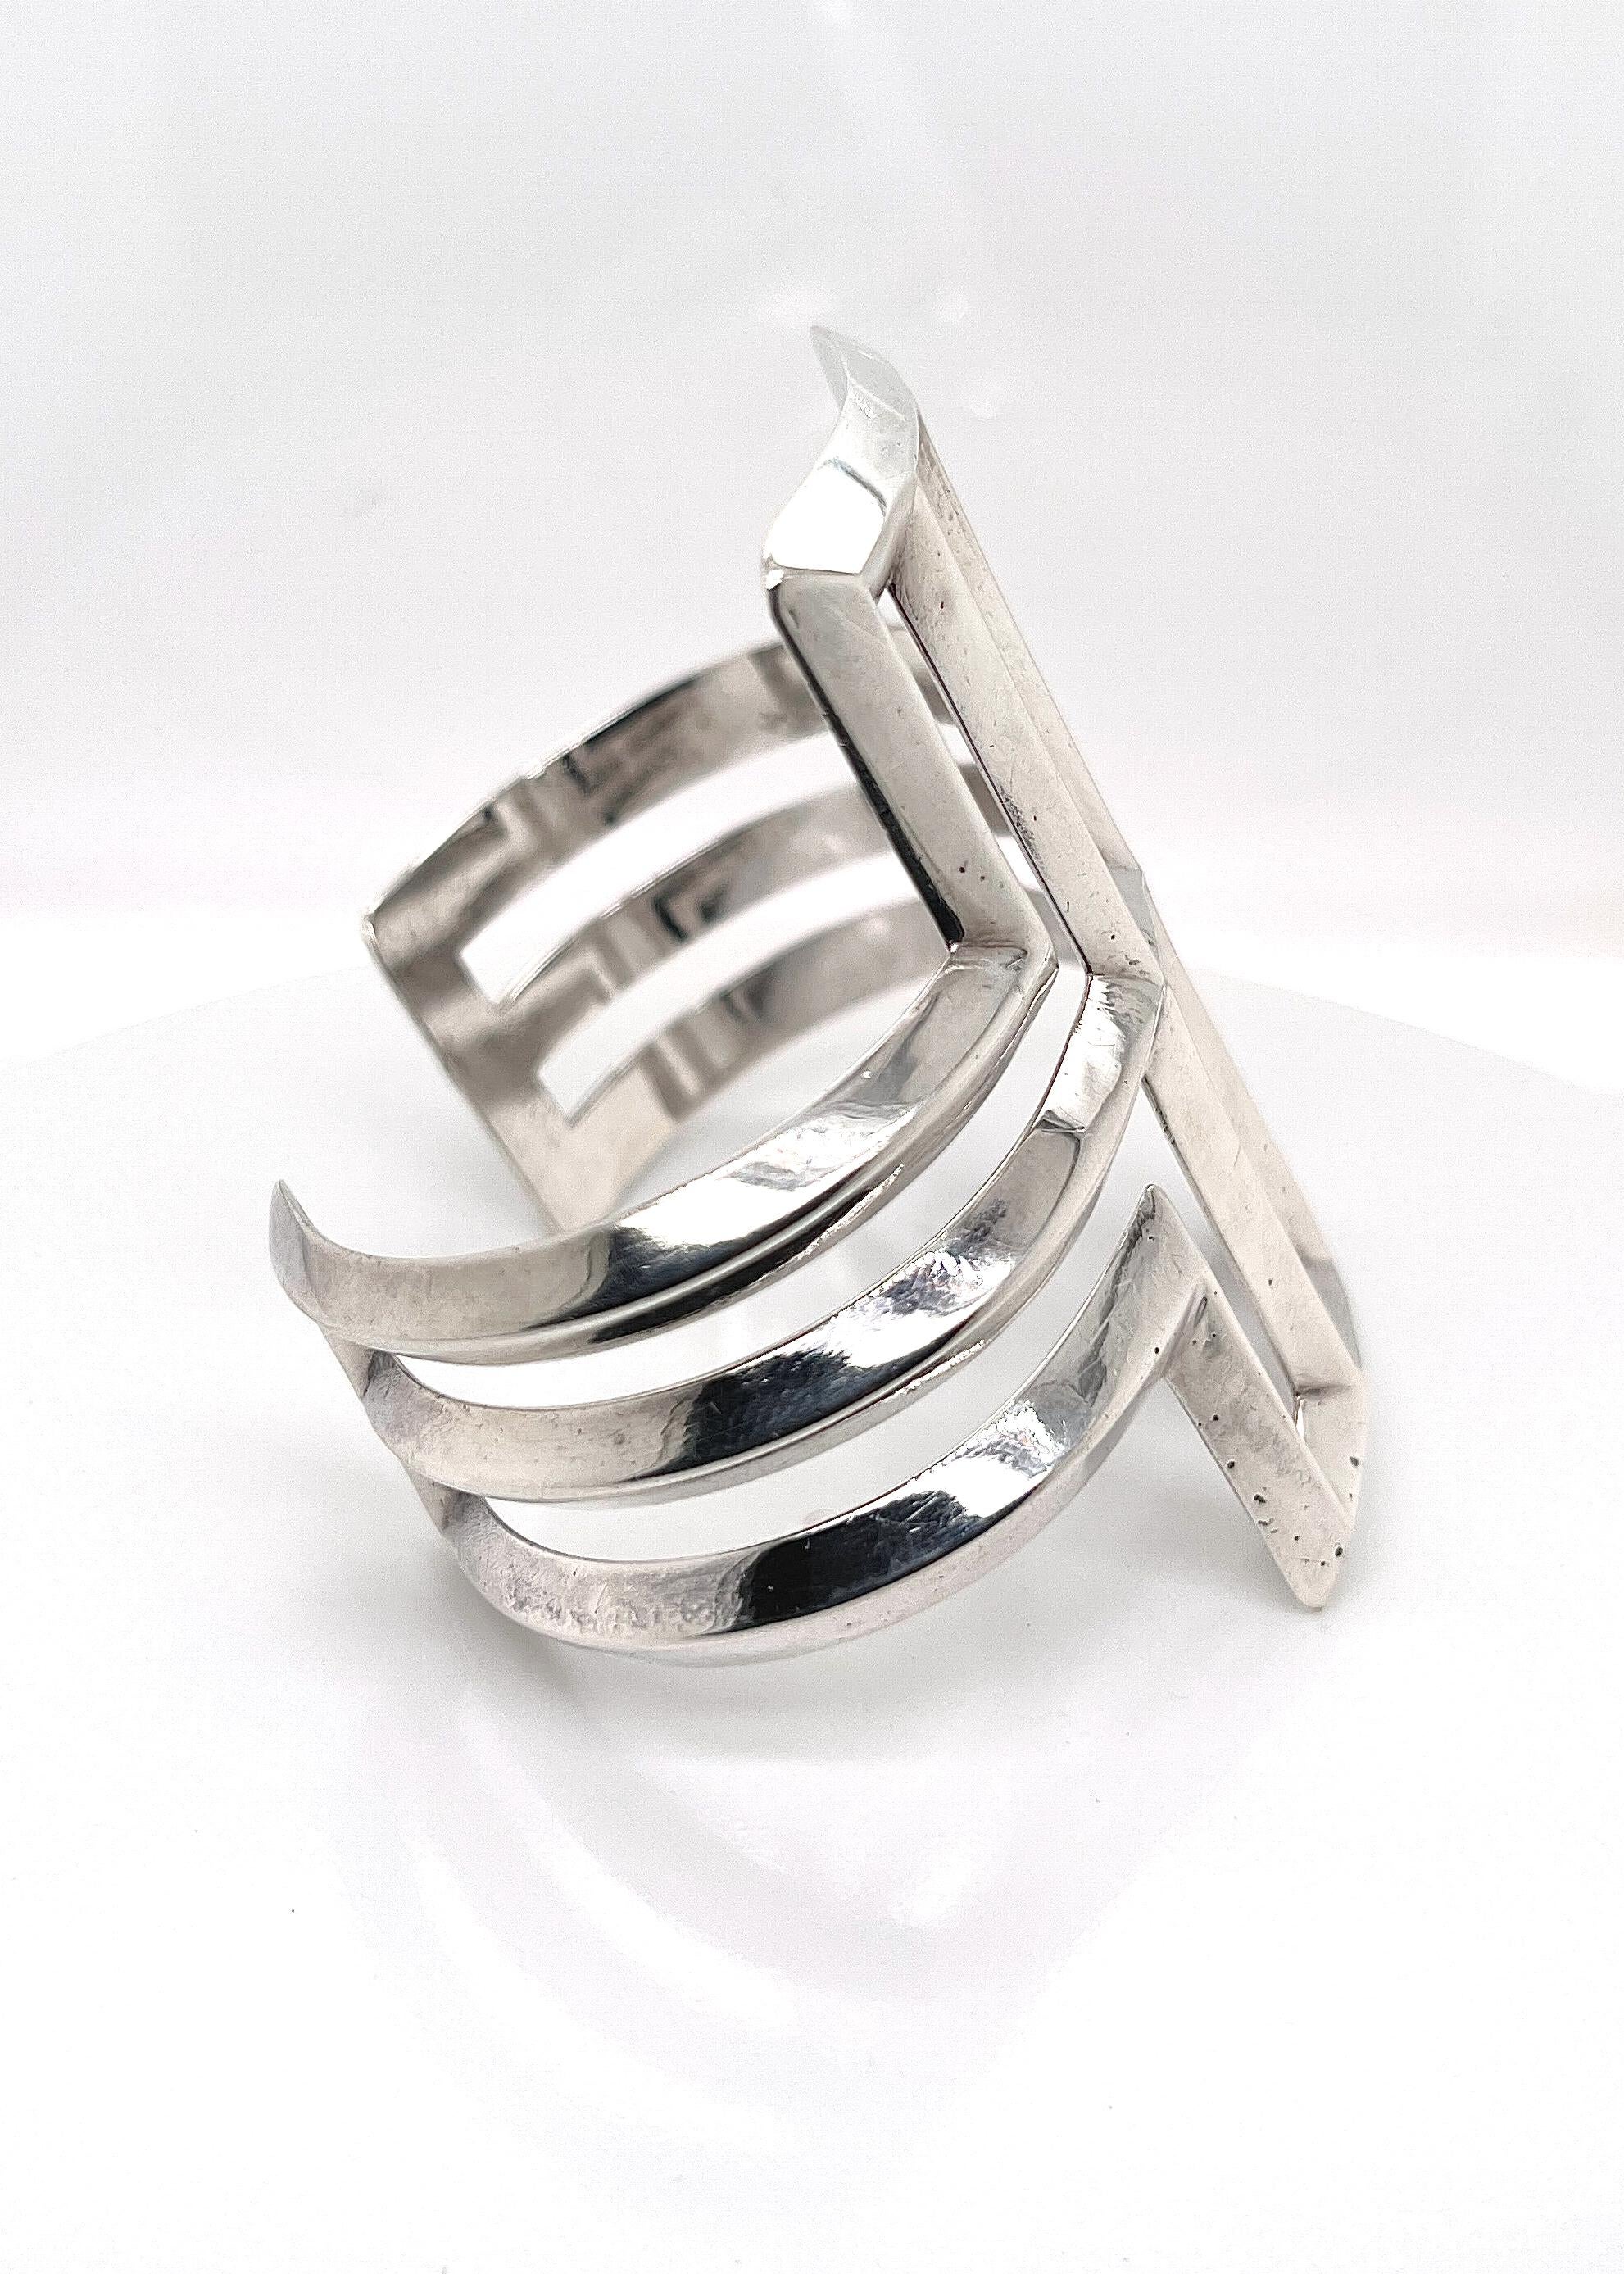 Native American Pine Springs Cast Sterling Silver Navajo Bracelet from Woodward's Indian Shop For Sale